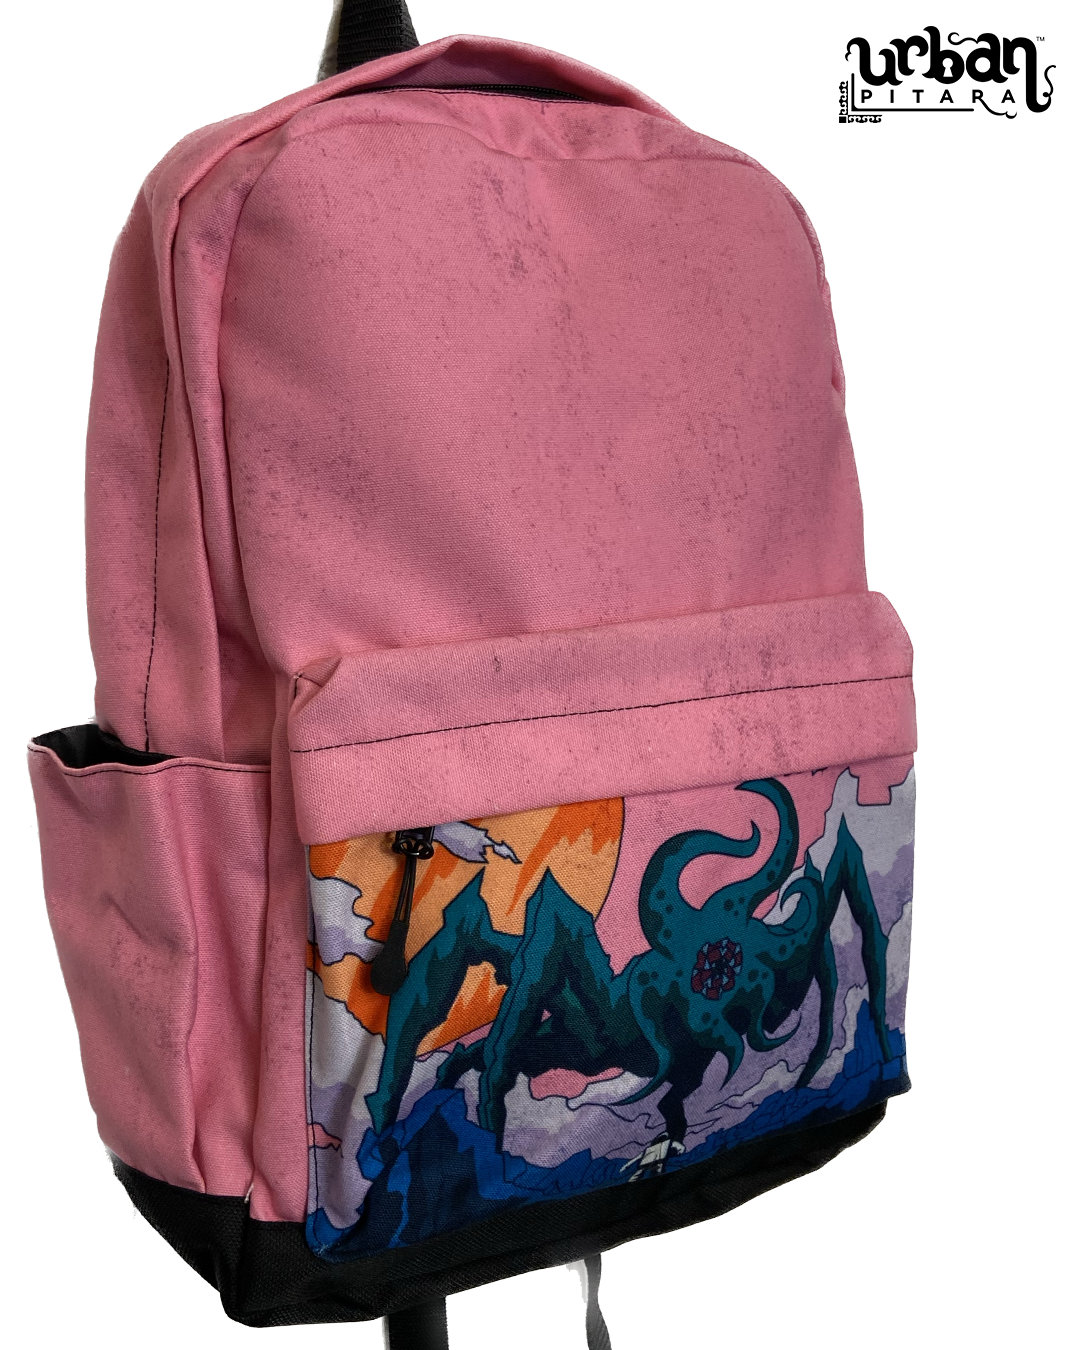 Spdy Invasion Canvas Backpack